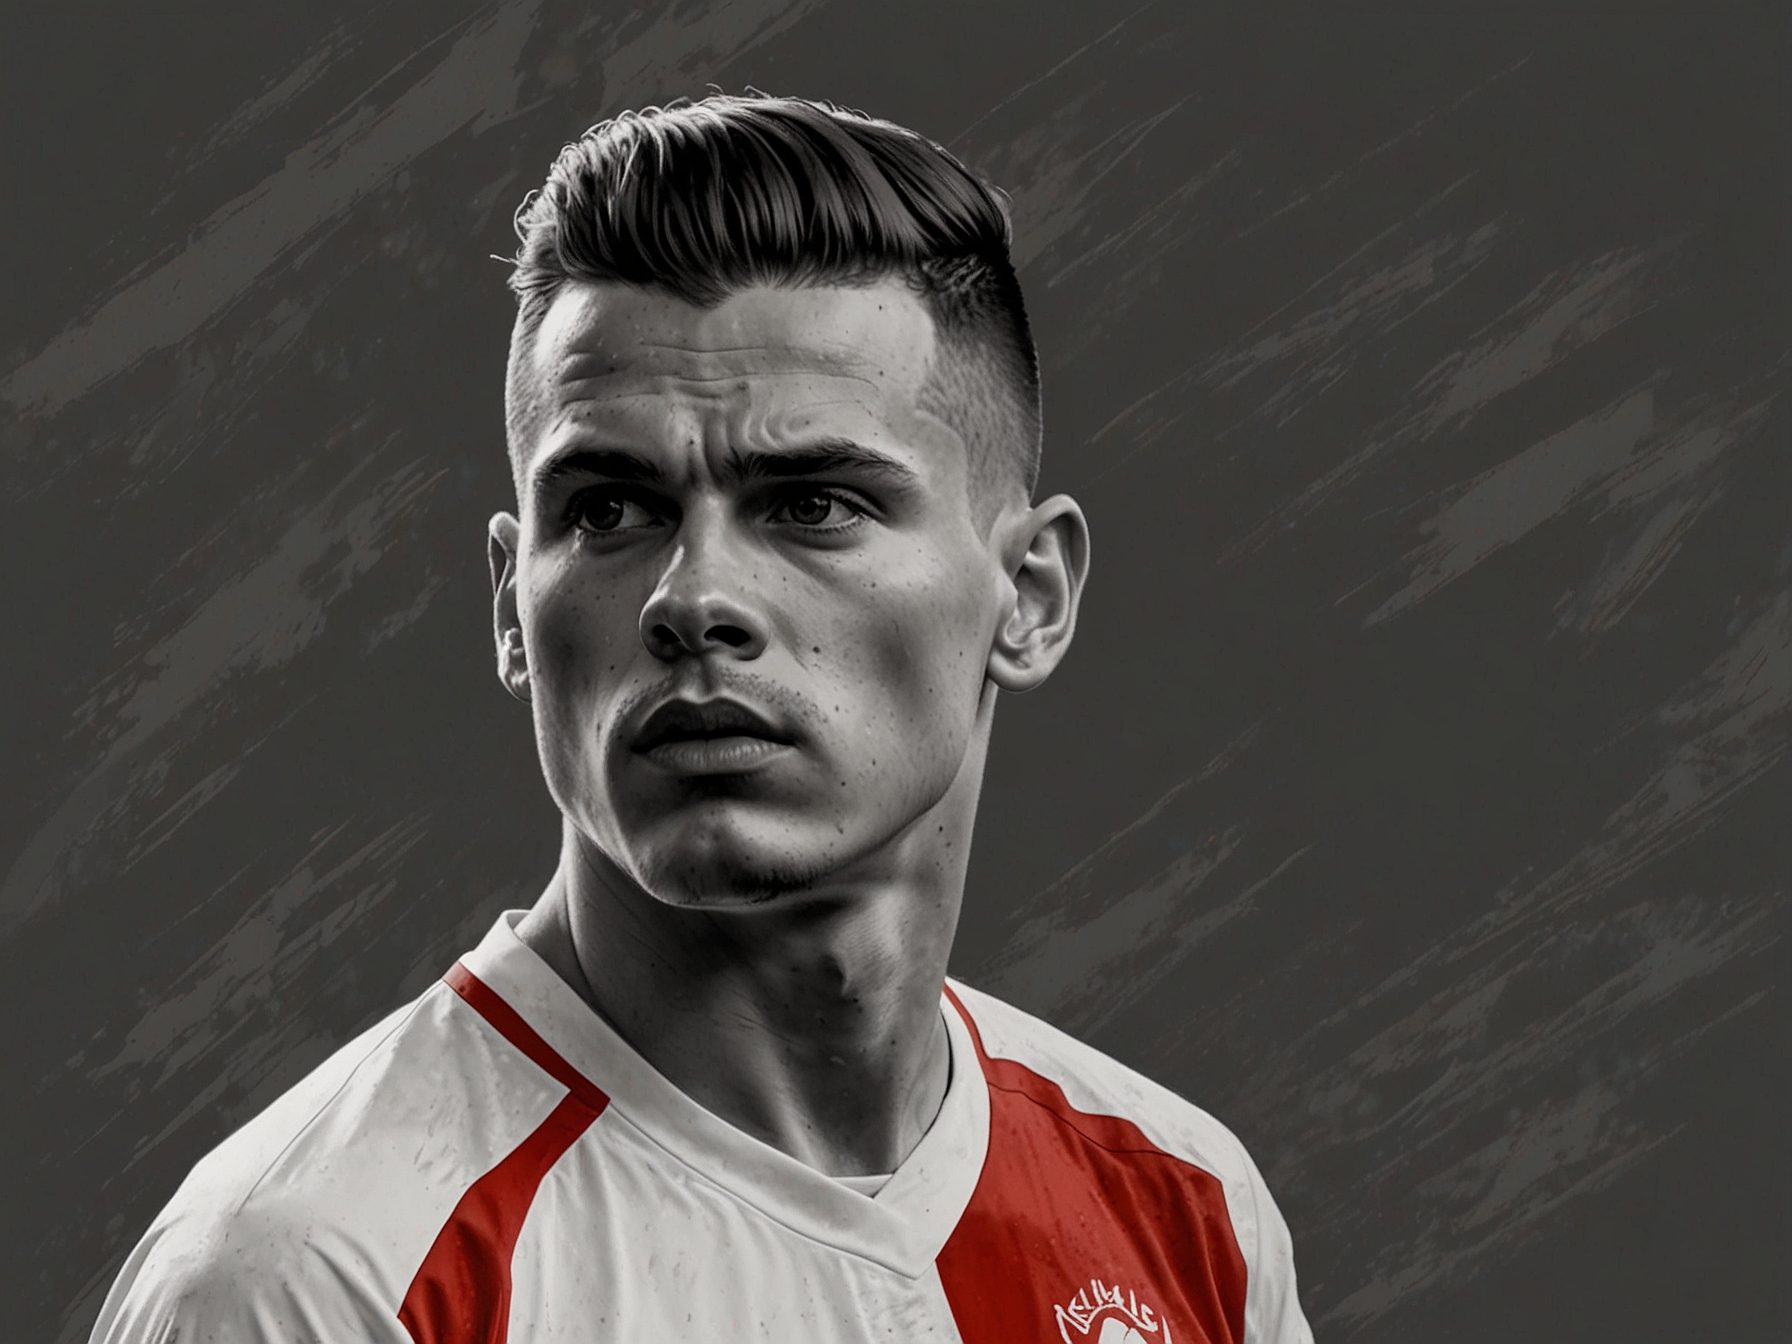 Midfielder Granit Xhaka in action, leading Switzerland as the team captain in the Euro 2024 opener against Hungary.